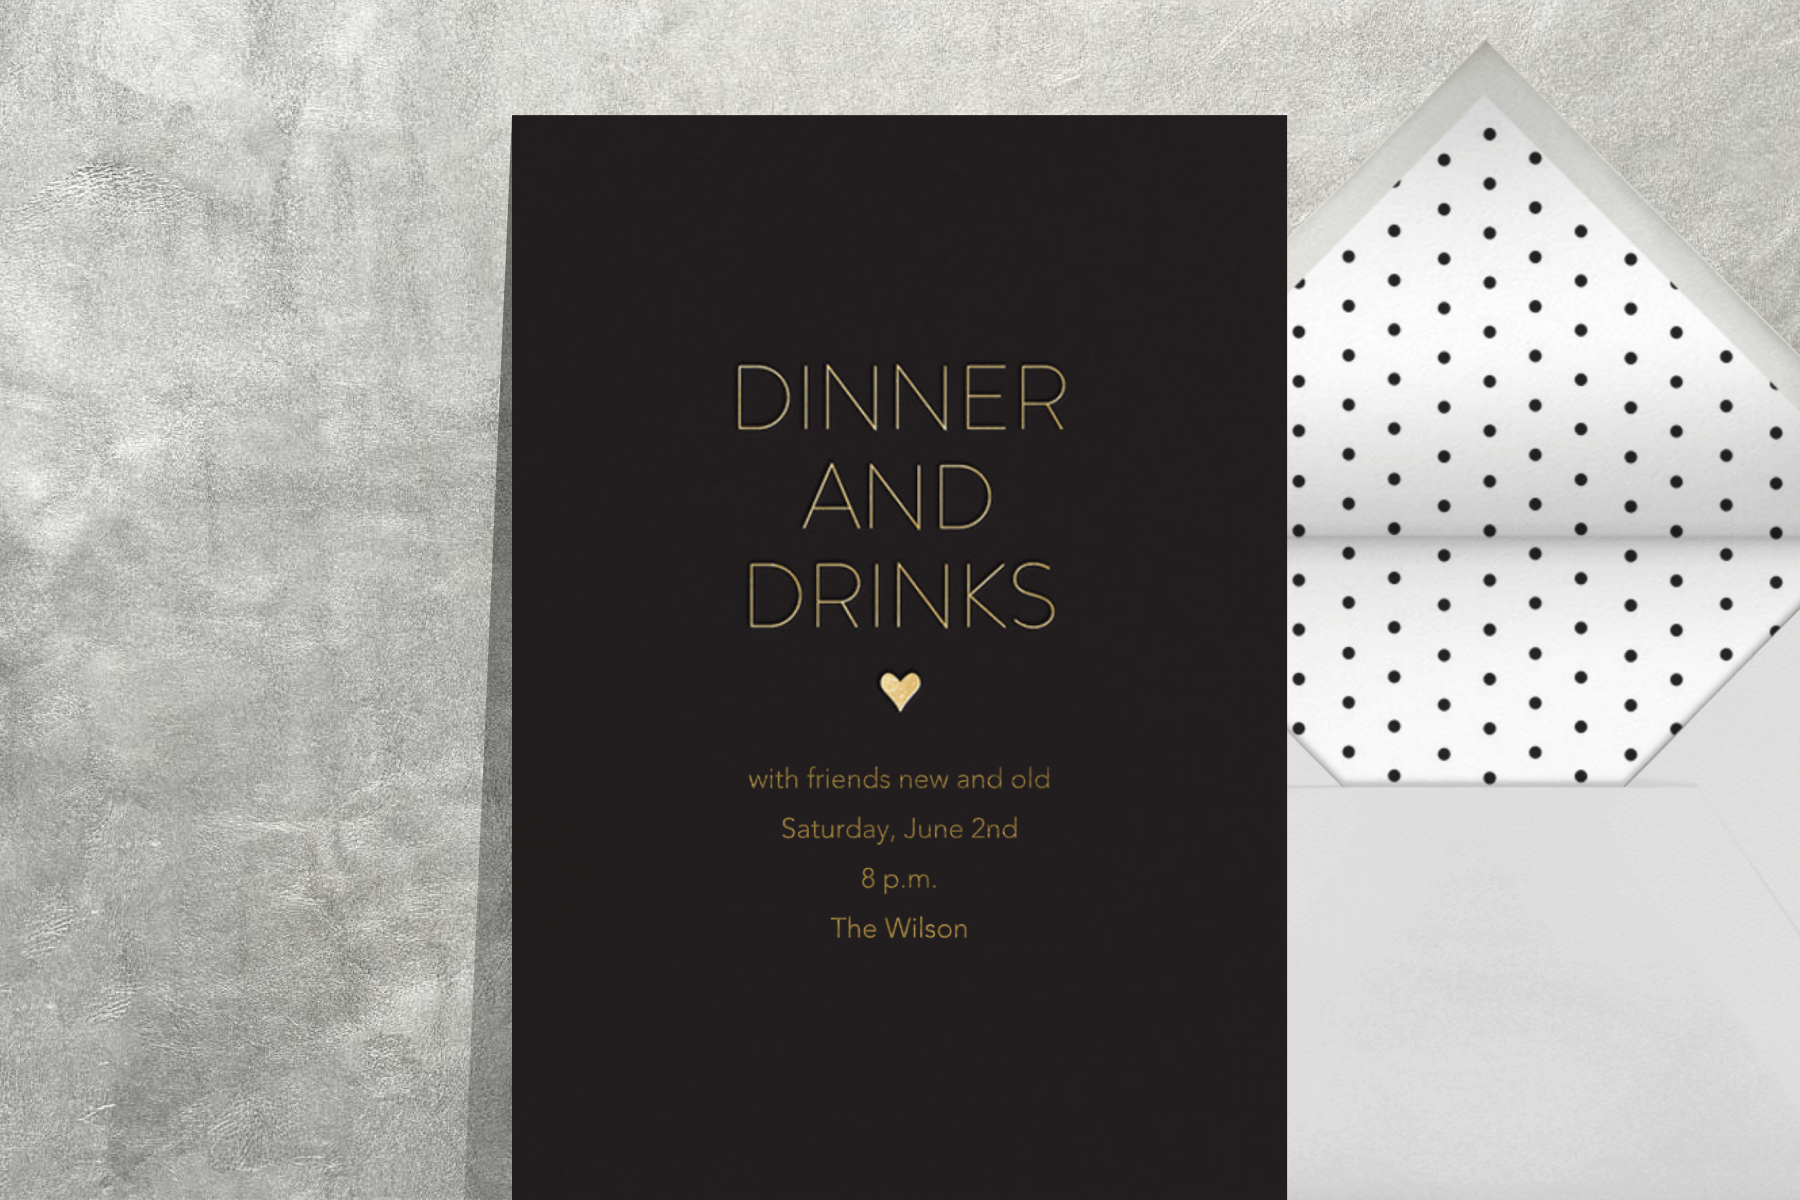 A rehearsal dinner invitation with a black background and “Dinner and drinks” in gold text.